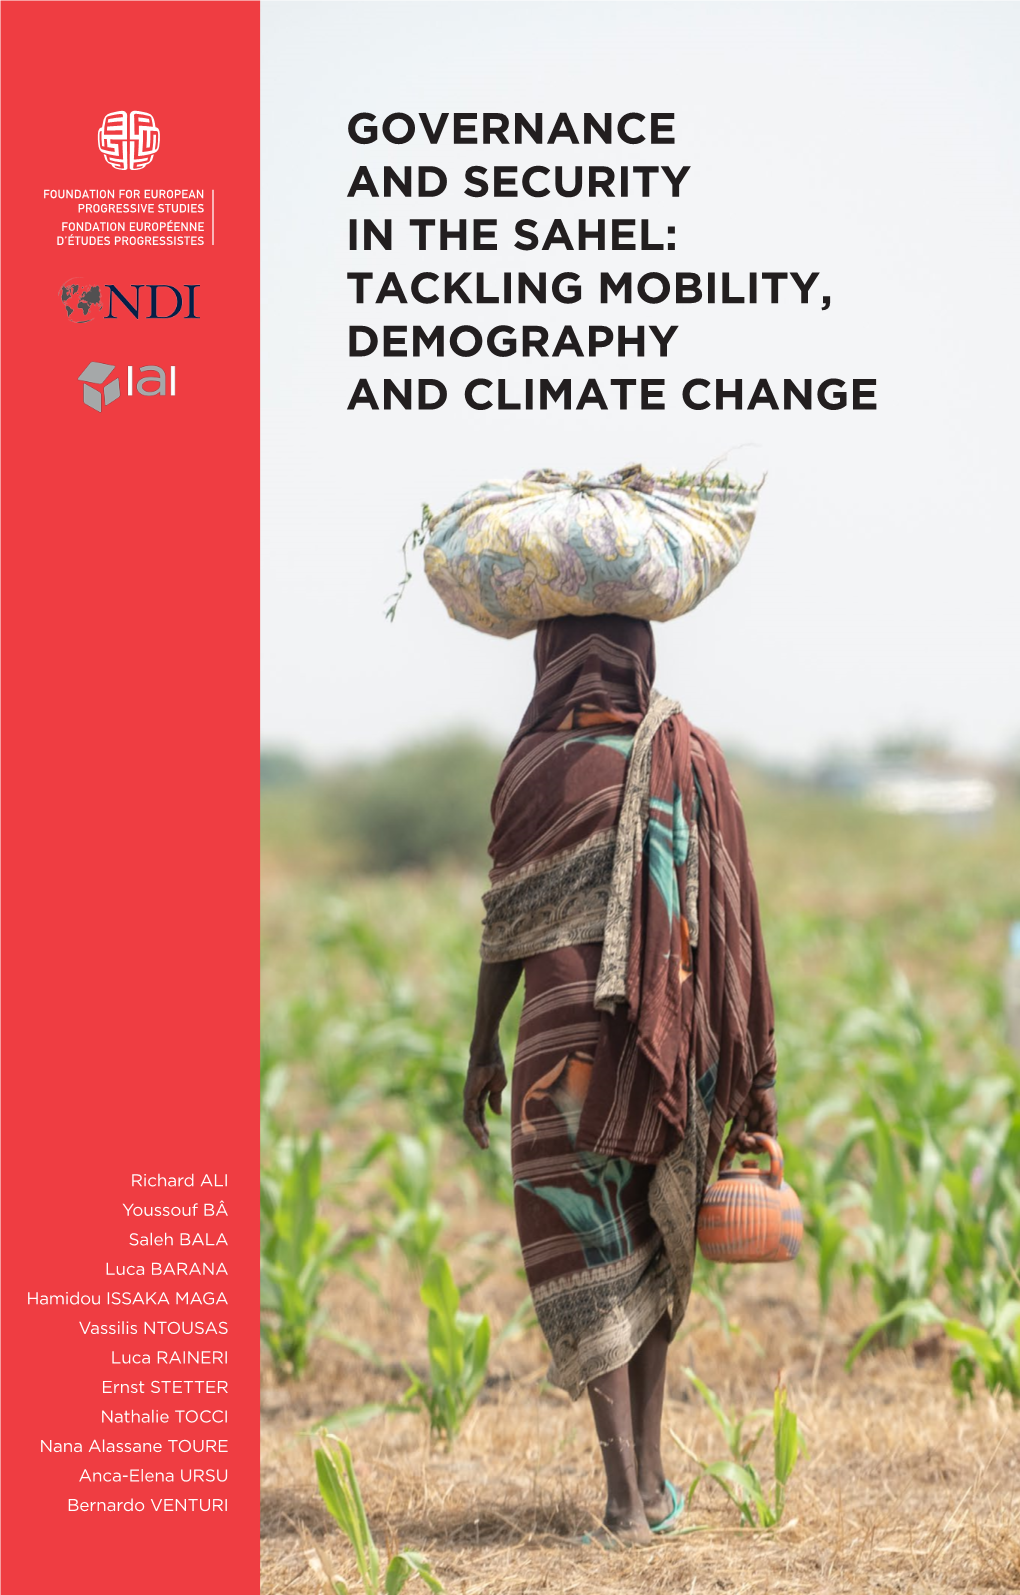 Governance and Security in the Sahel: Tackling Mobility, Demography and Climate Change